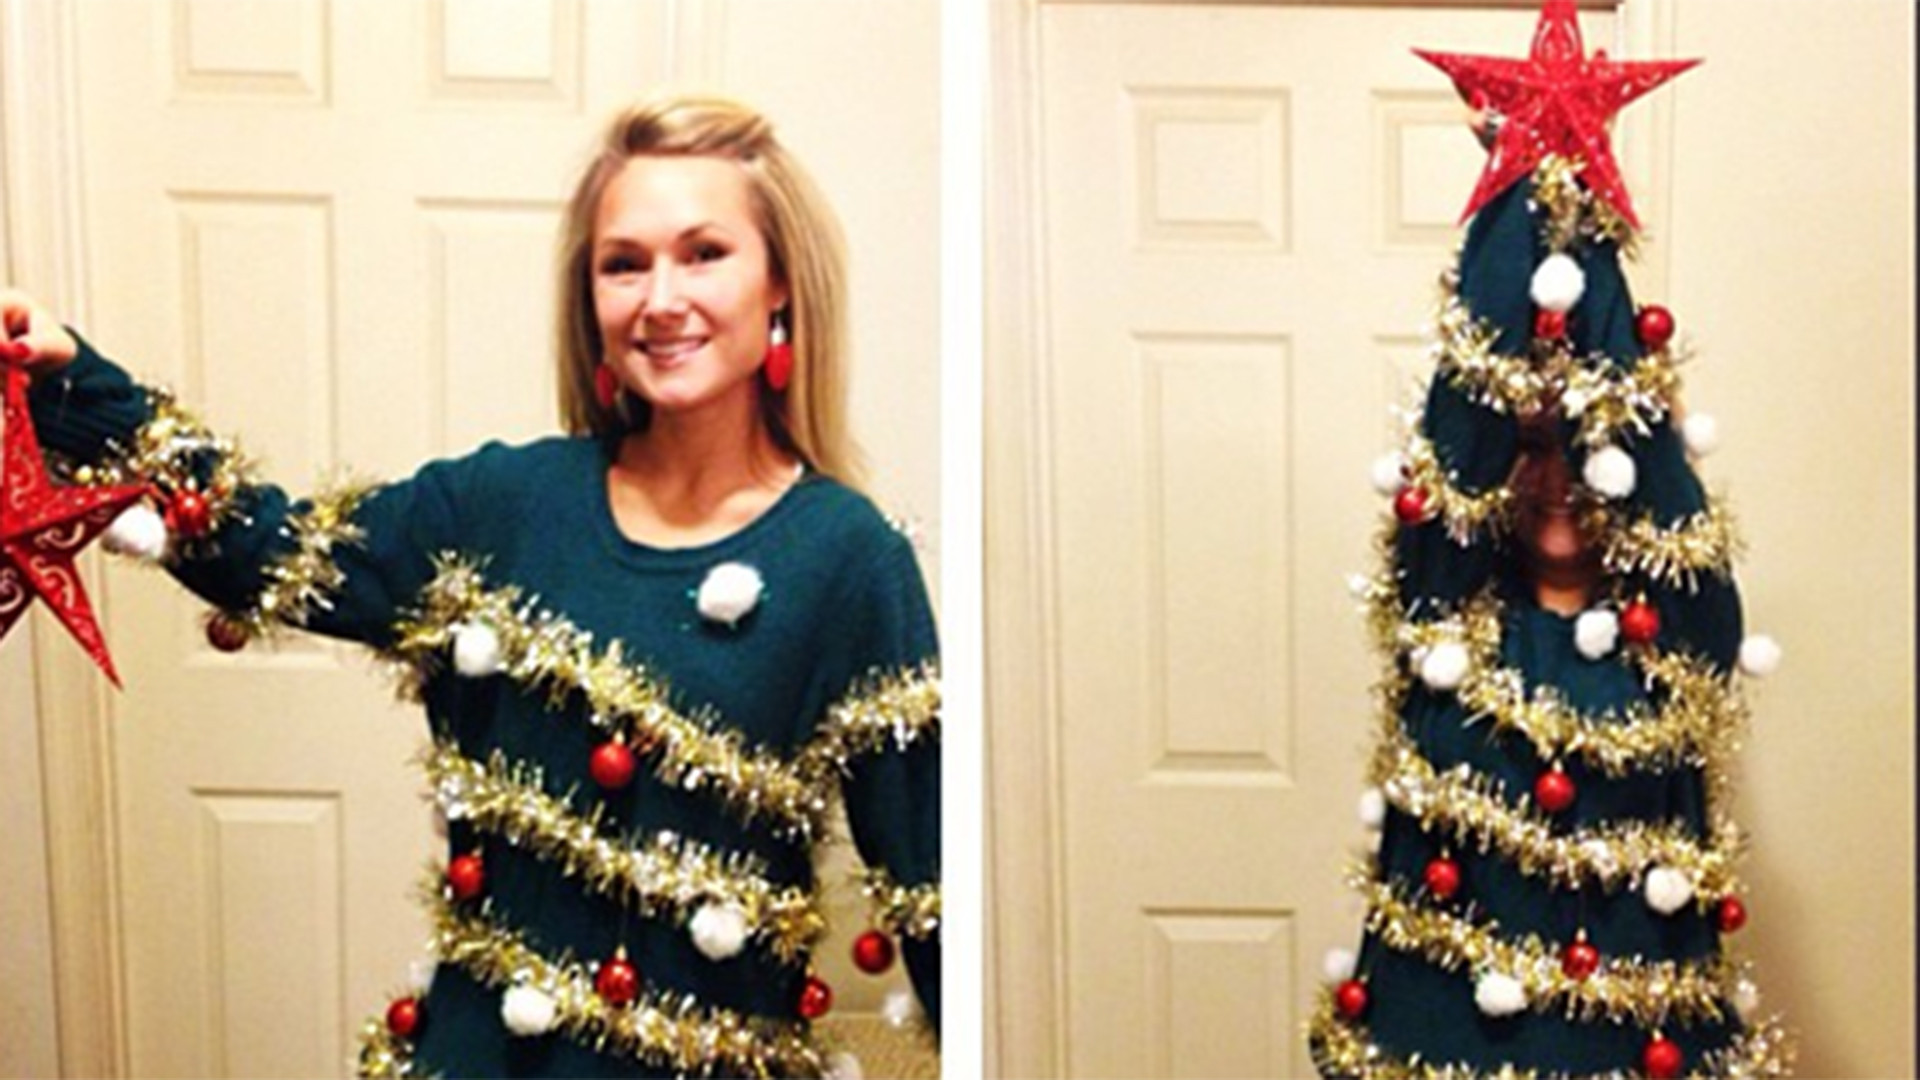 Best DIY Ugly Christmas Sweater
 7 DIY ugly Christmas sweaters from Pinterest TODAY